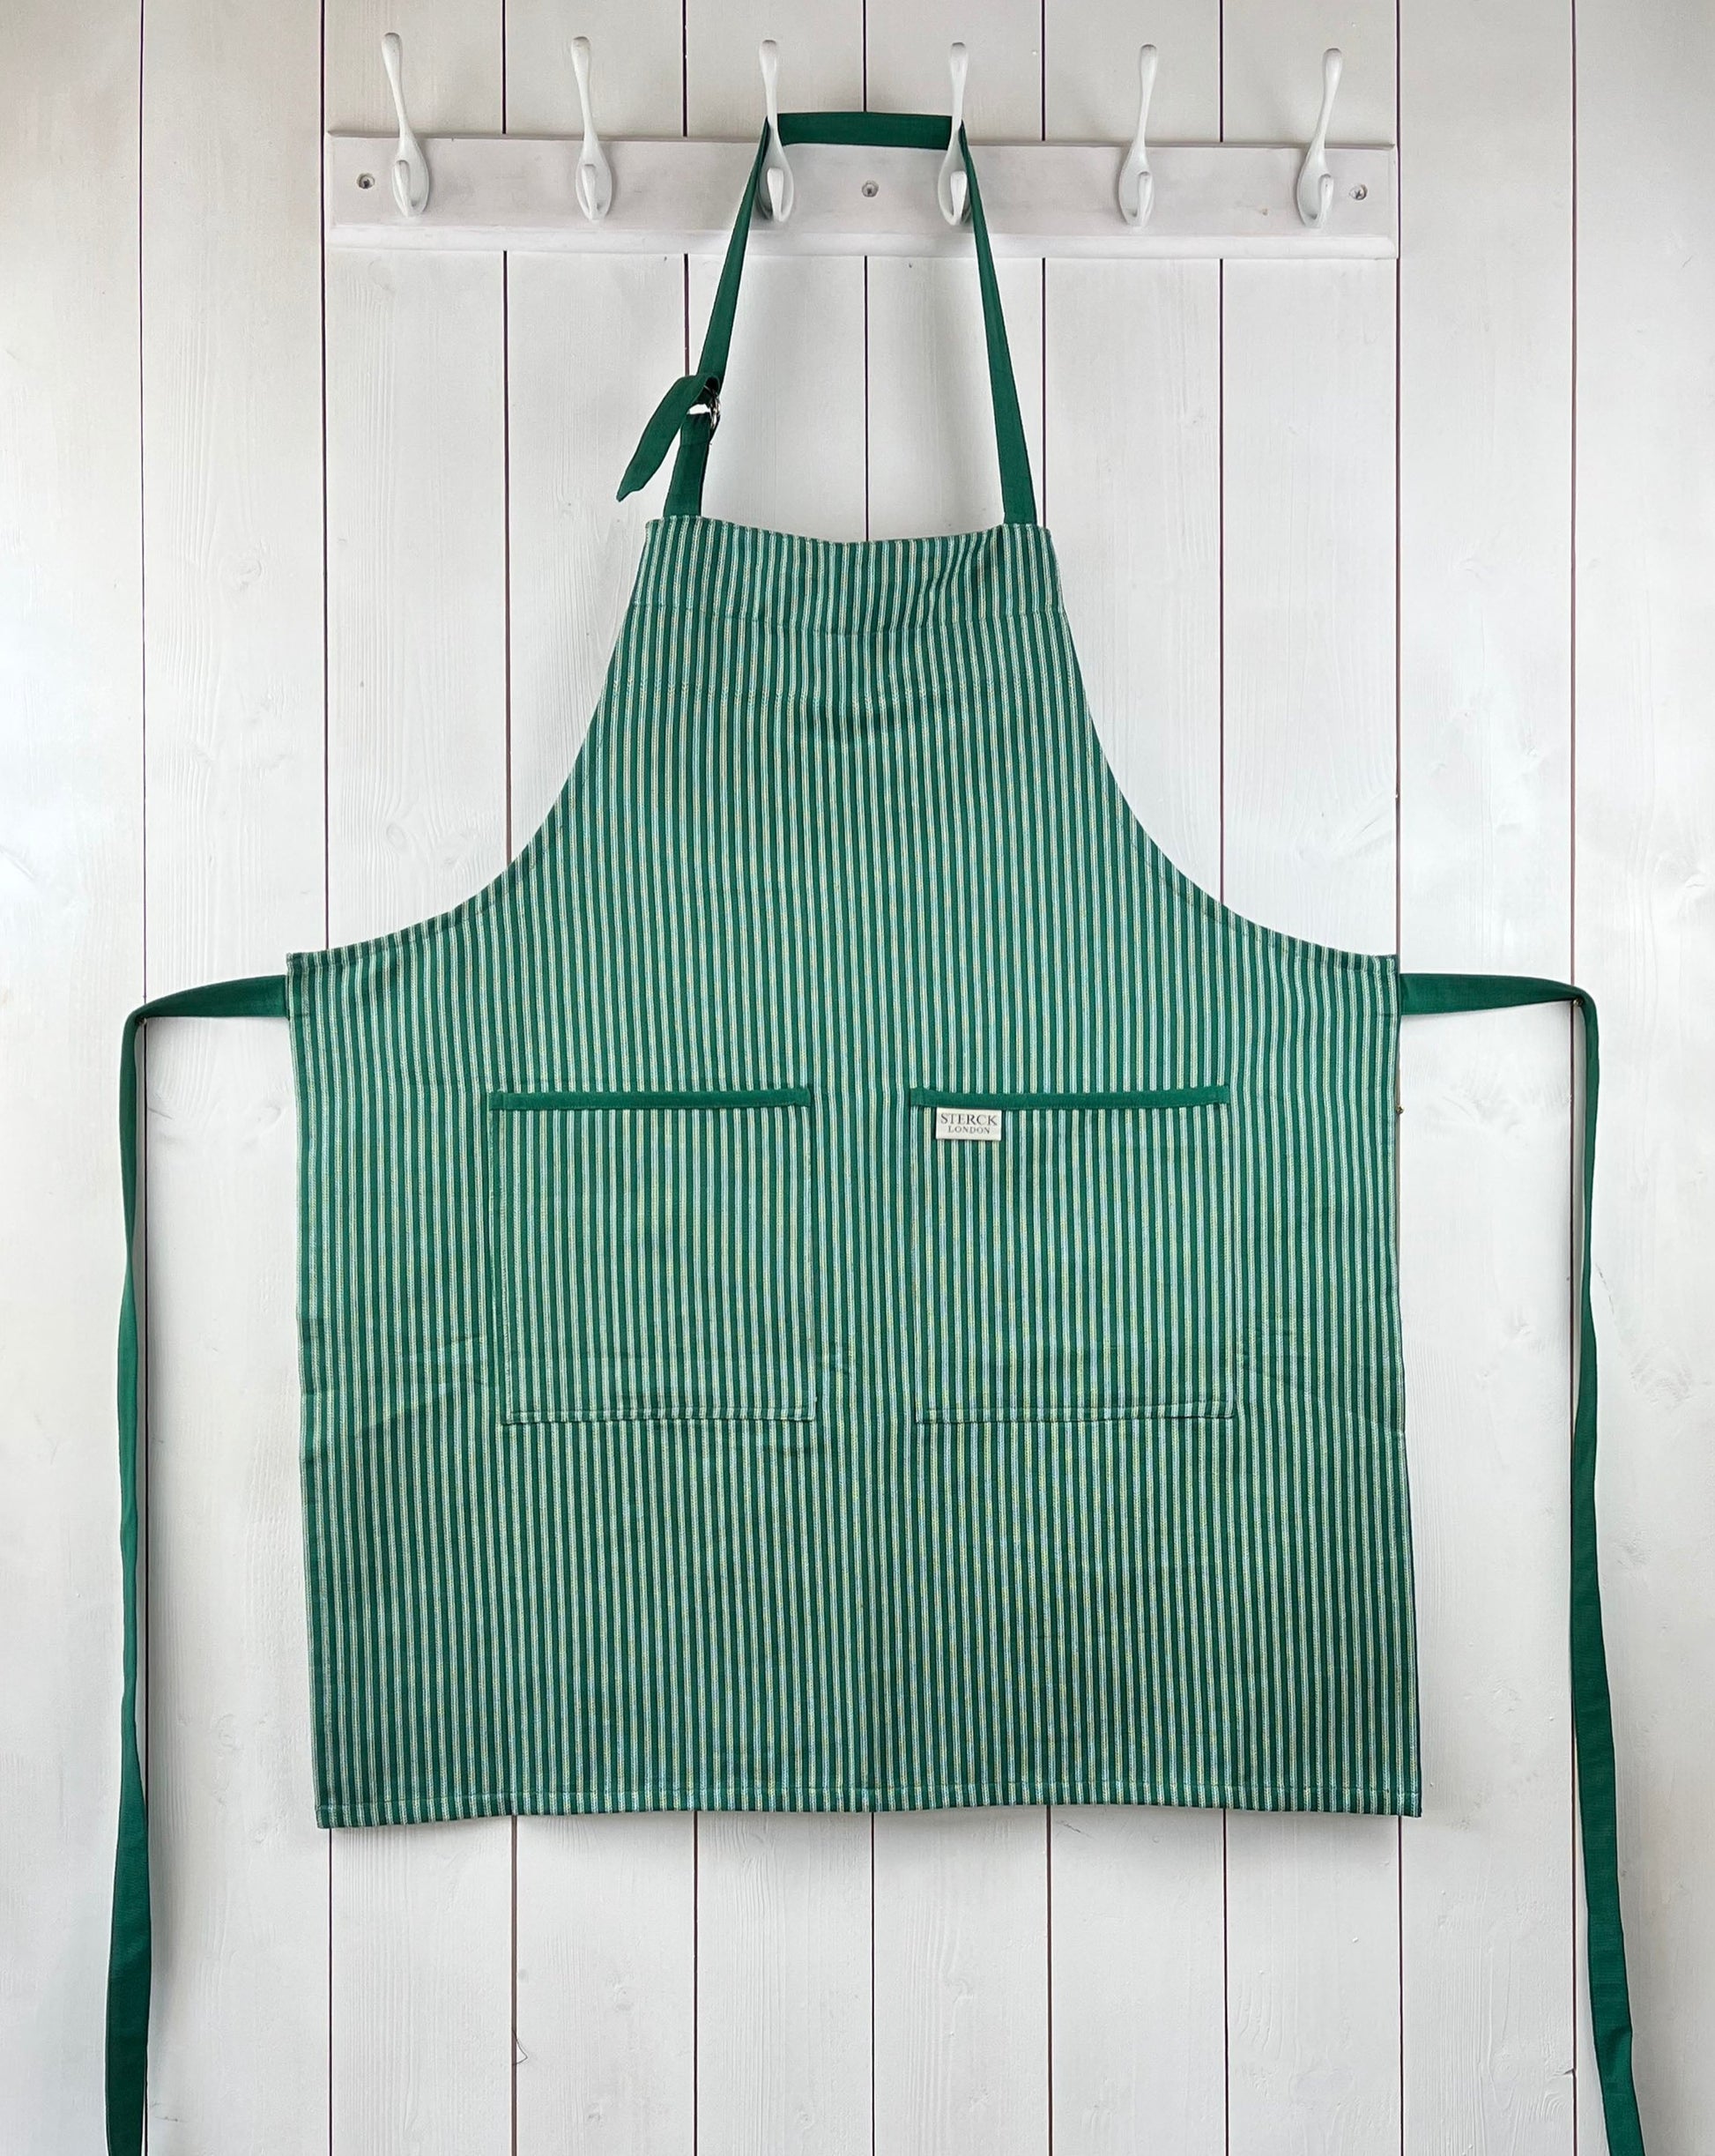 Green striped cotton apron with double front pockets, green ties and adjustable neck strap. Sterck & Co. Drum green.